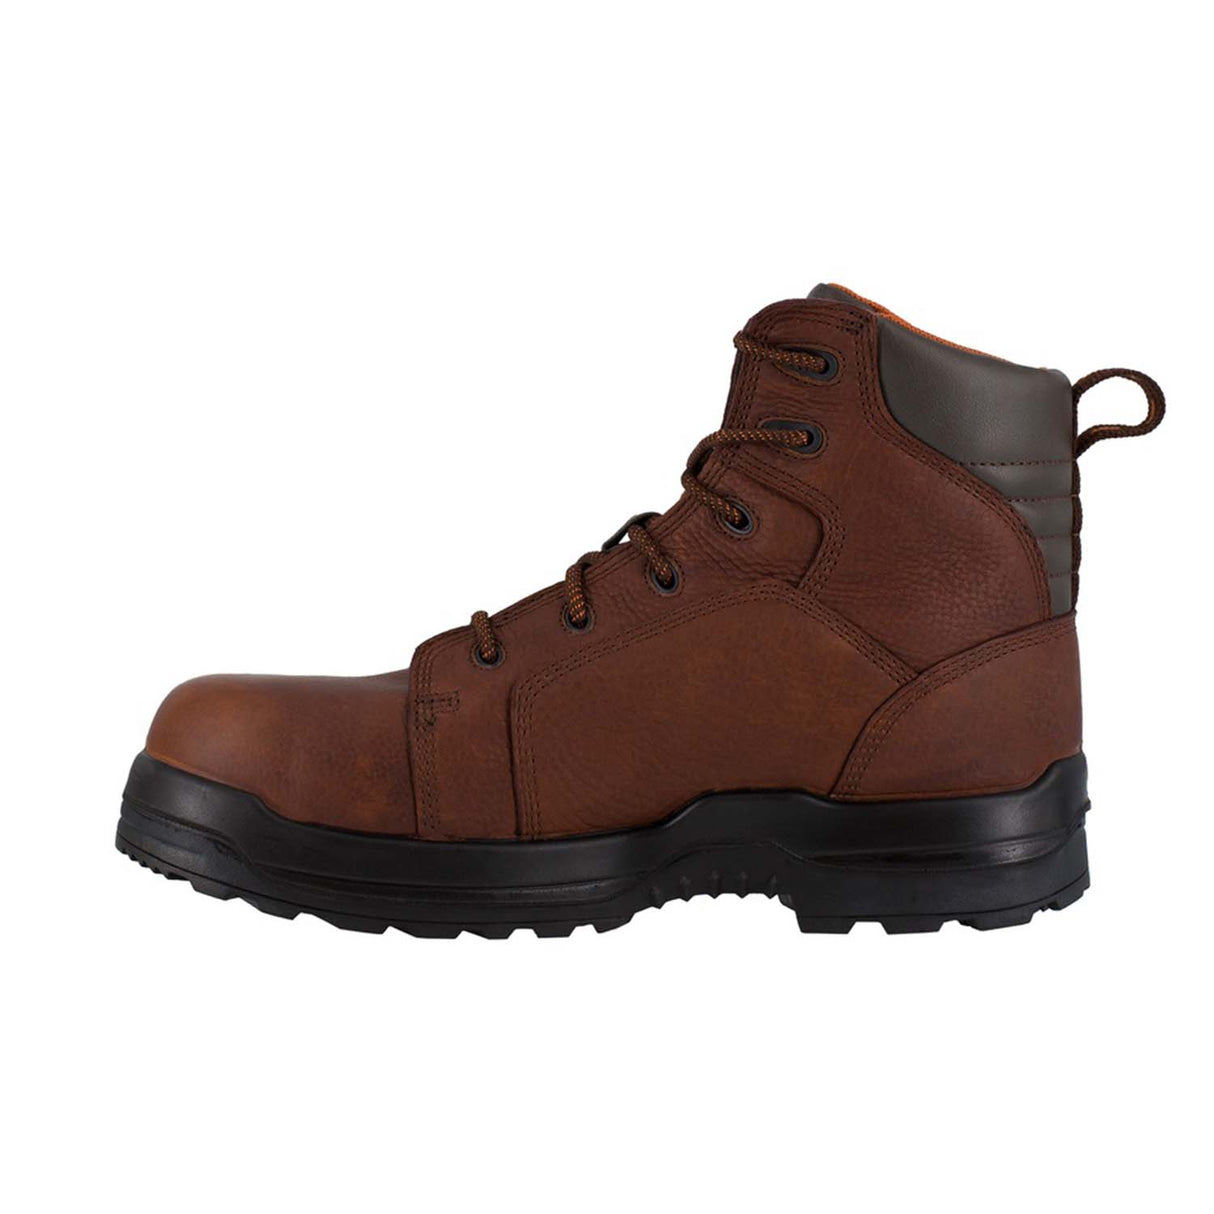 Rockport Work More Energy Comp-Toe Boots RK664-3